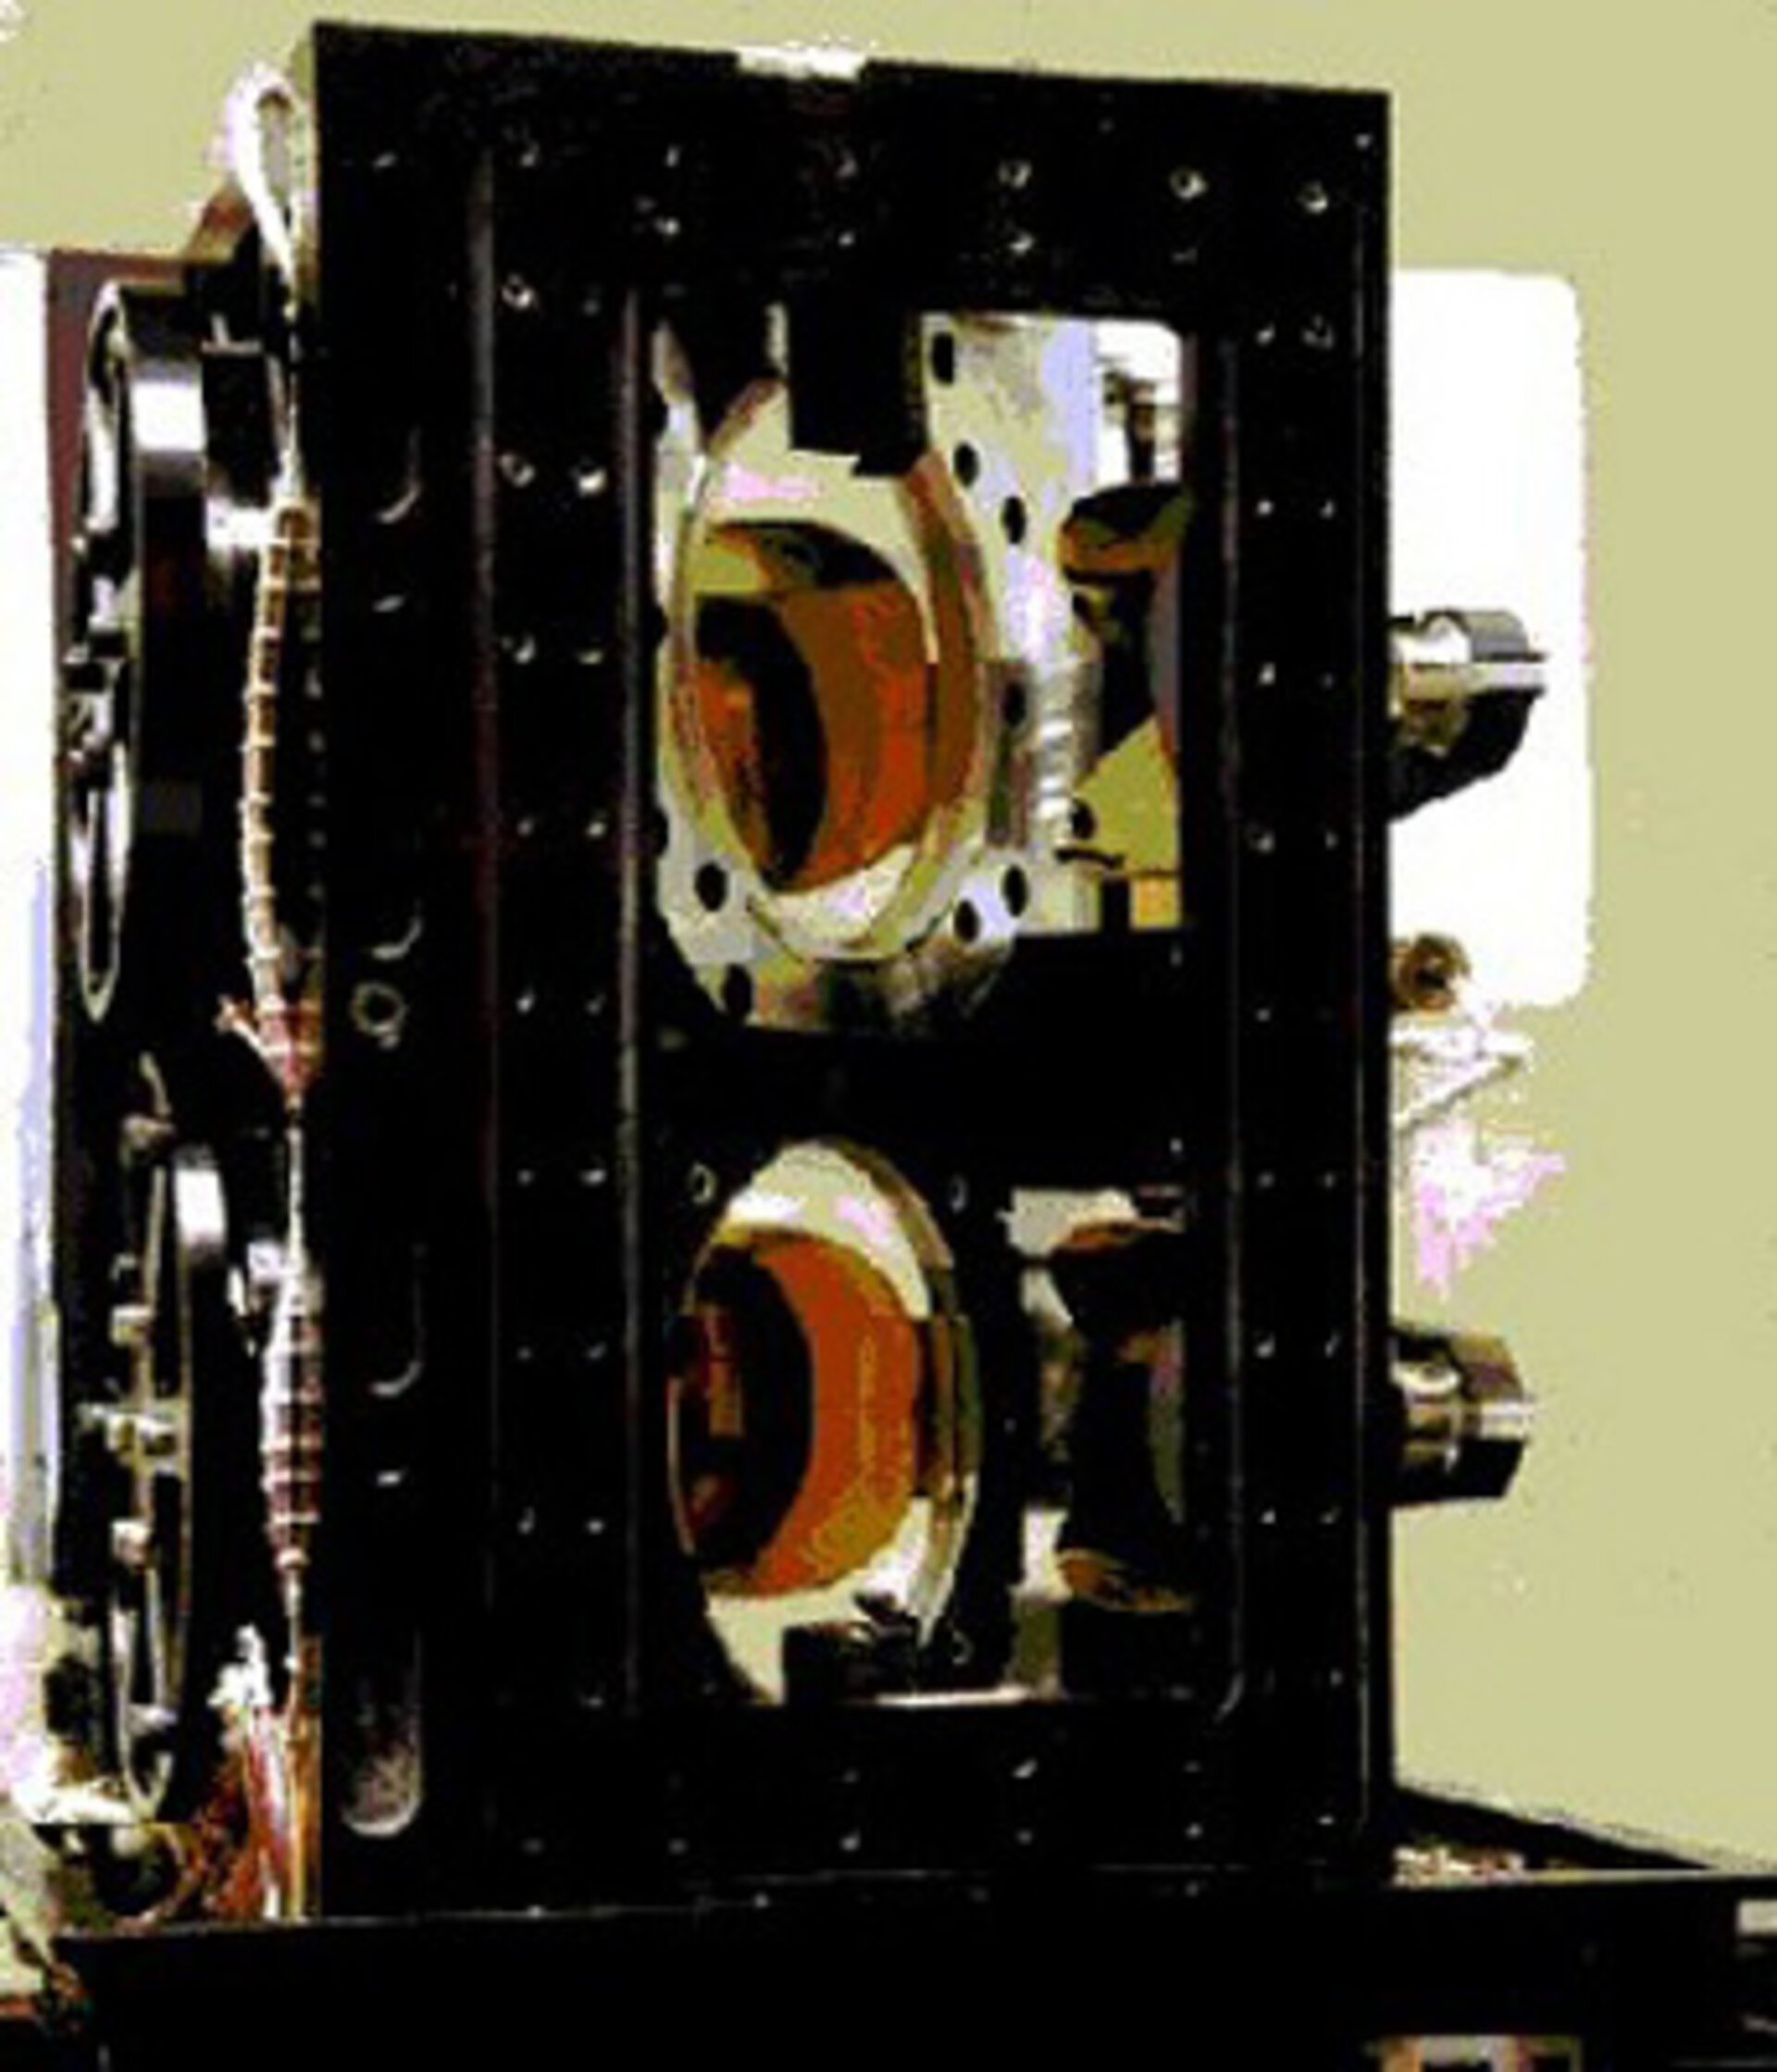 The Mars Express Planetary Fourier Spectrometer